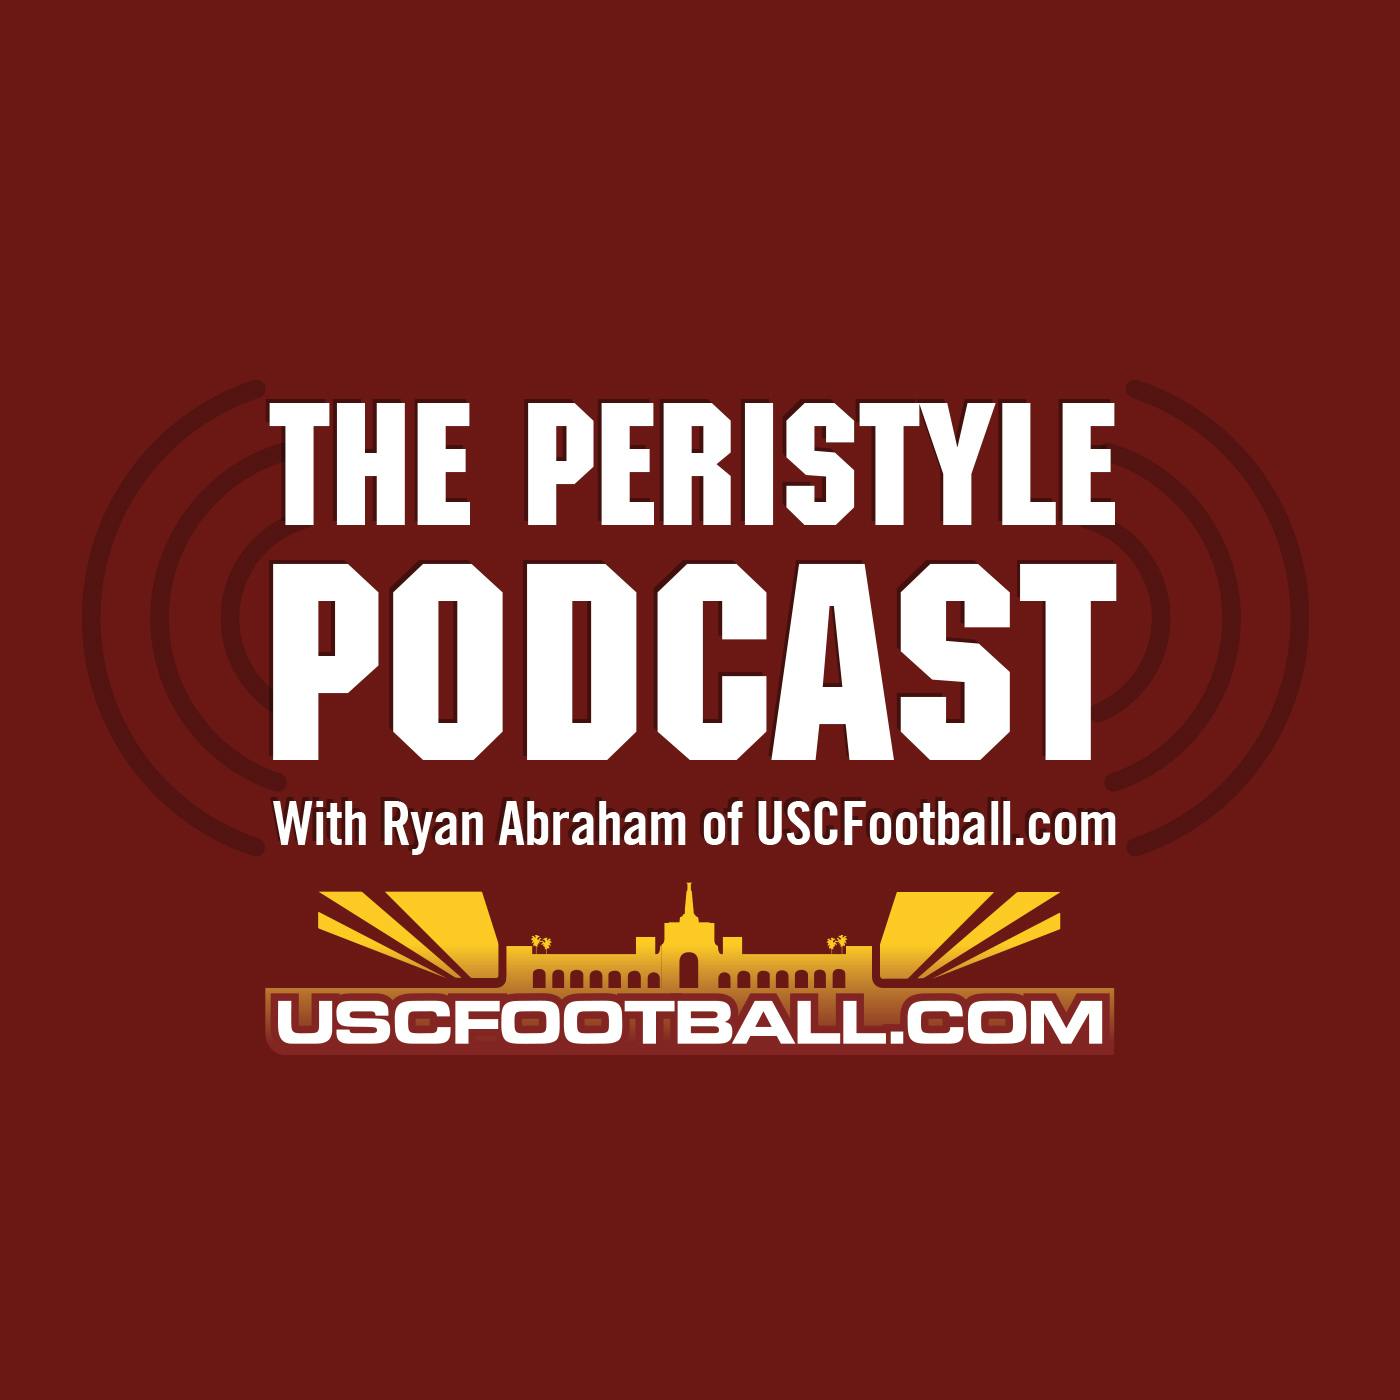 Pac-12 Media Day recap plus USC Fall Camp preview